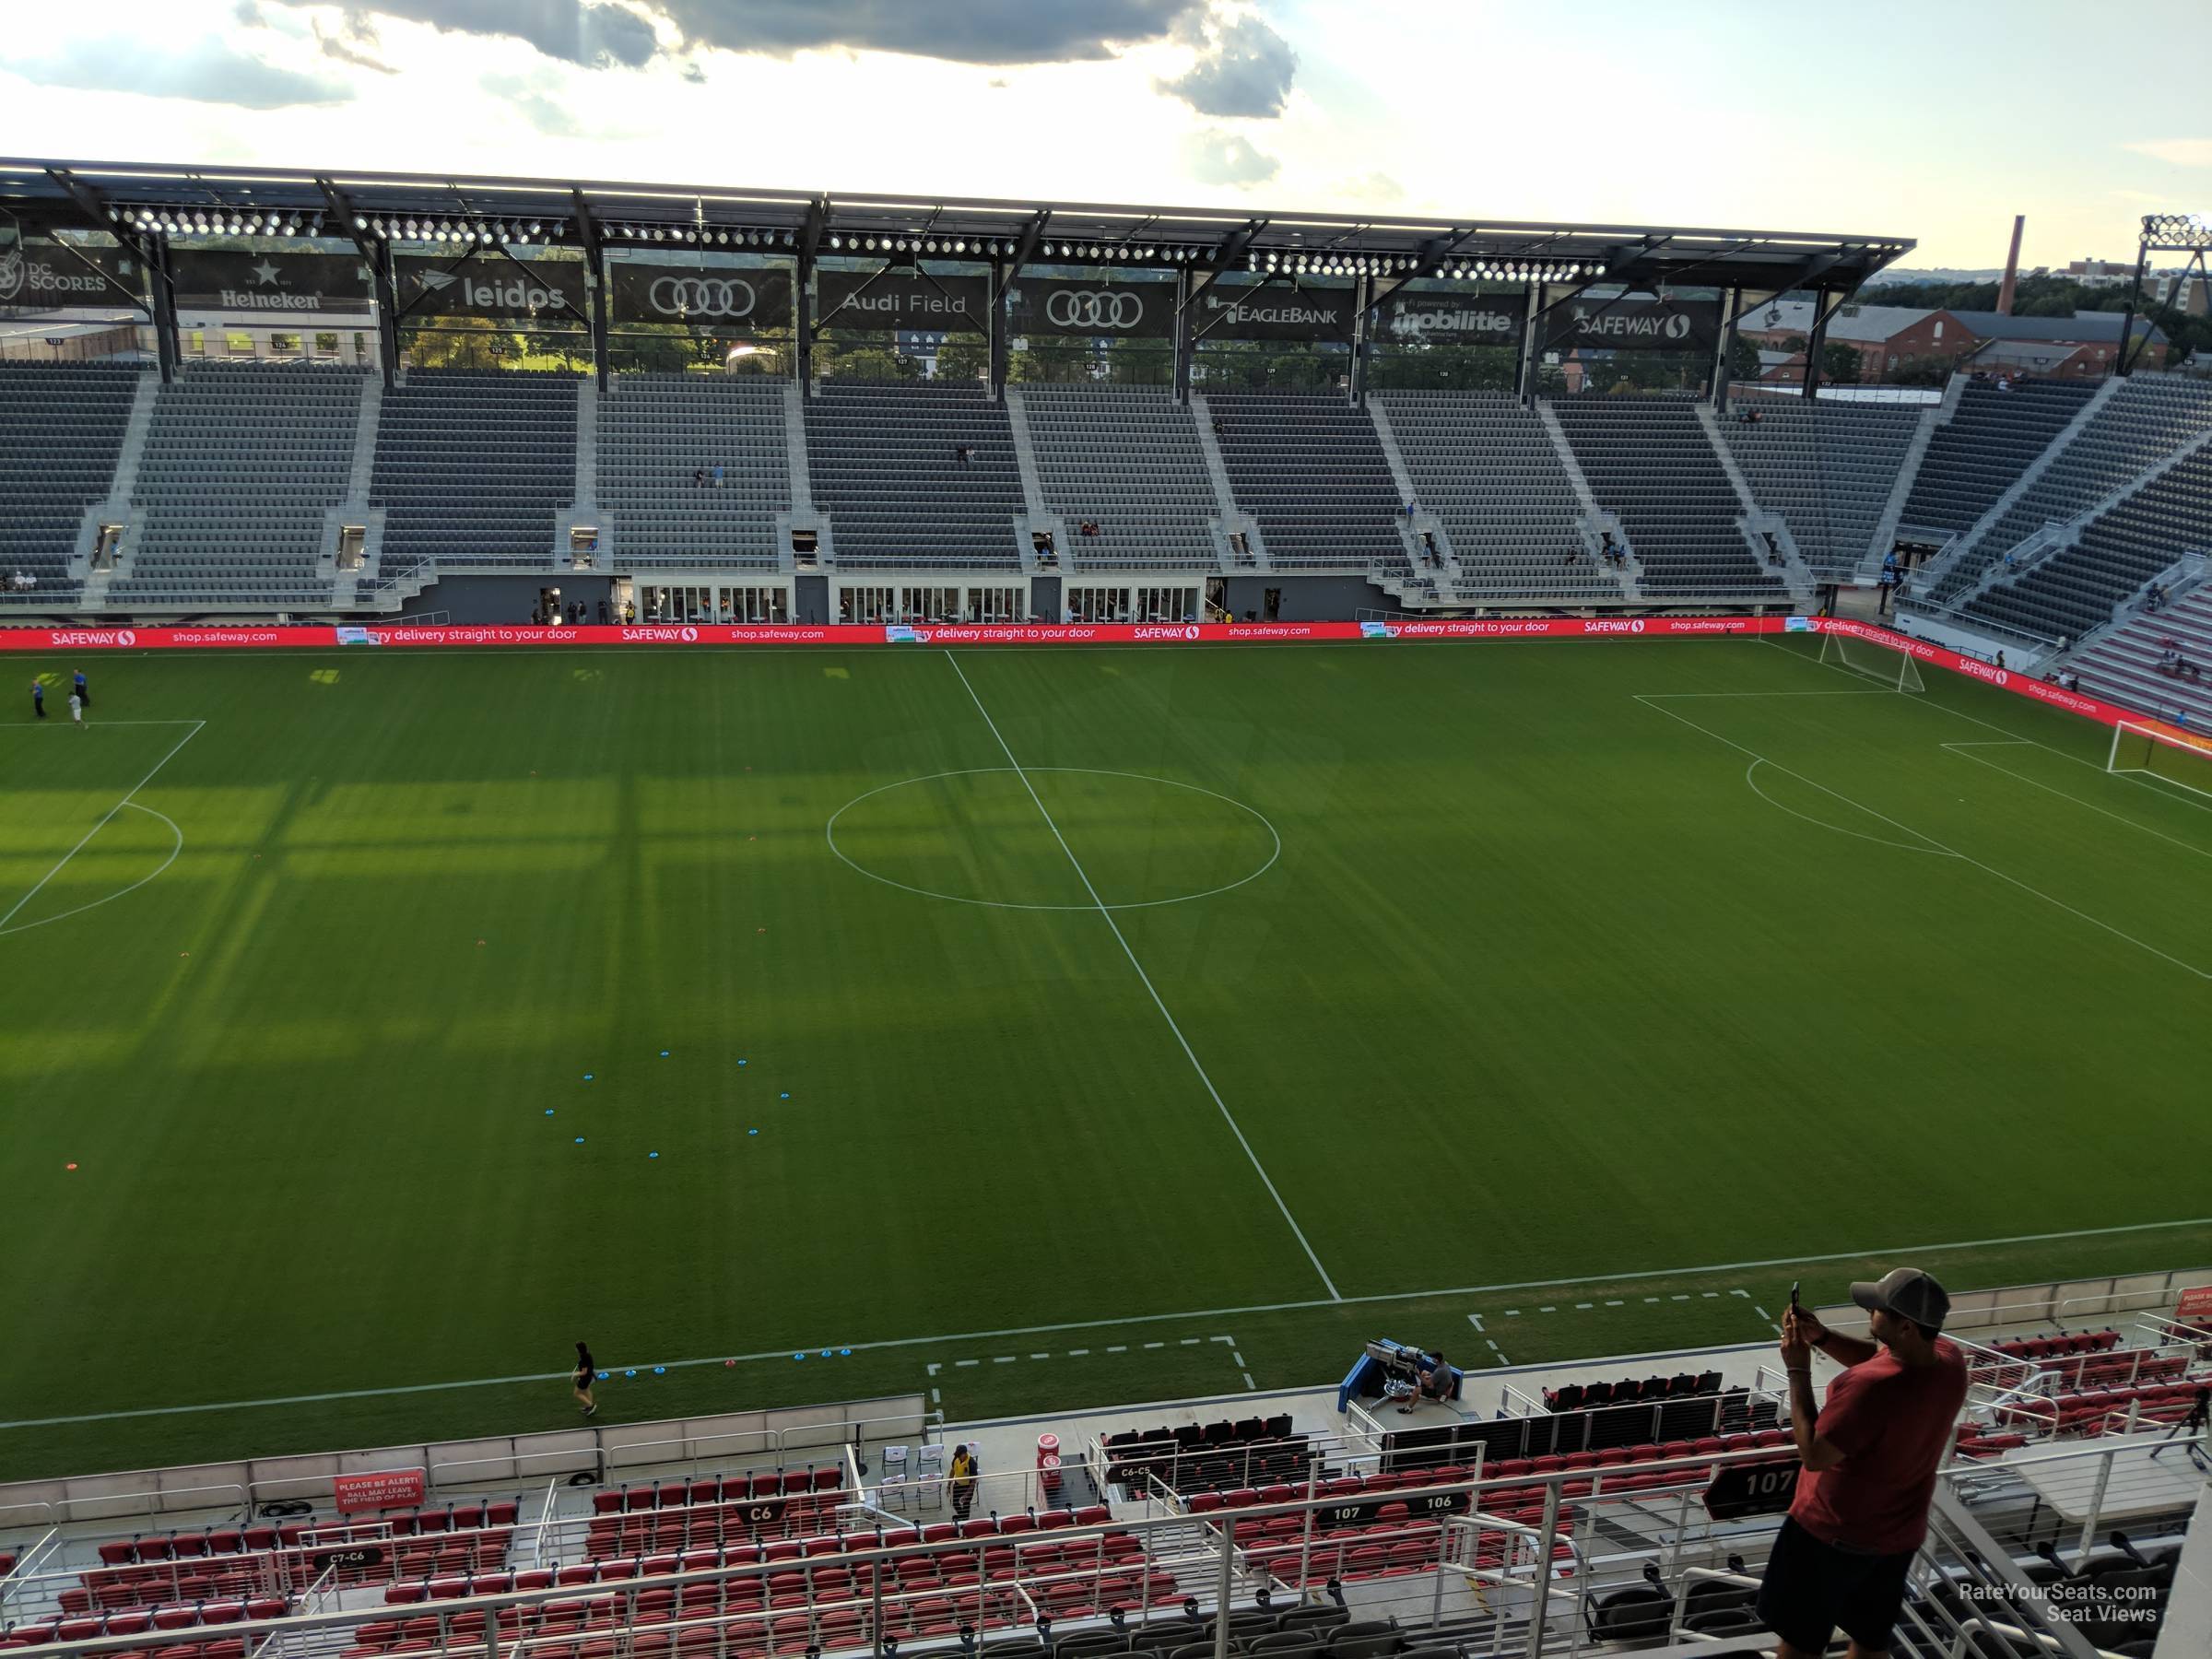 section 207, row 6 seat view  - audi field